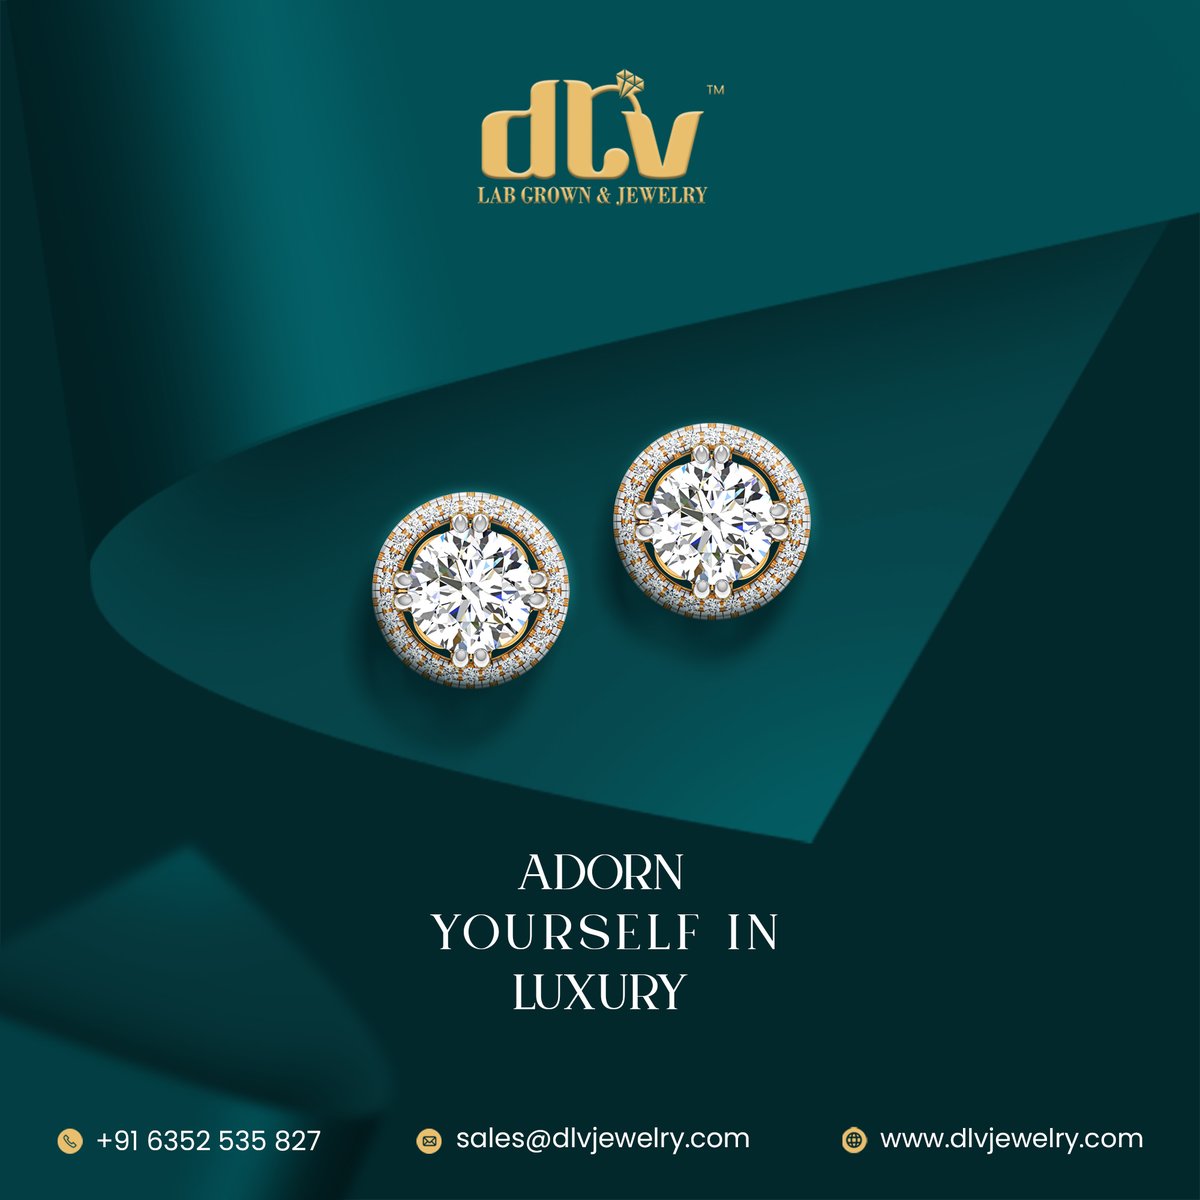 Earrings are the perfect way to add a little bit of sparkle to your outfit..🥰😍

USA 🇺🇲
Diamond 💎
Dlvjewelry 💝
Round design ❤️
Earrings 🔥
_
_

dlvjewelry.com 🛍️
devlabtechventure.com 🎁

#dlvdiamondusa #usajewelry #earrings #regular #specialperson #designerofusa